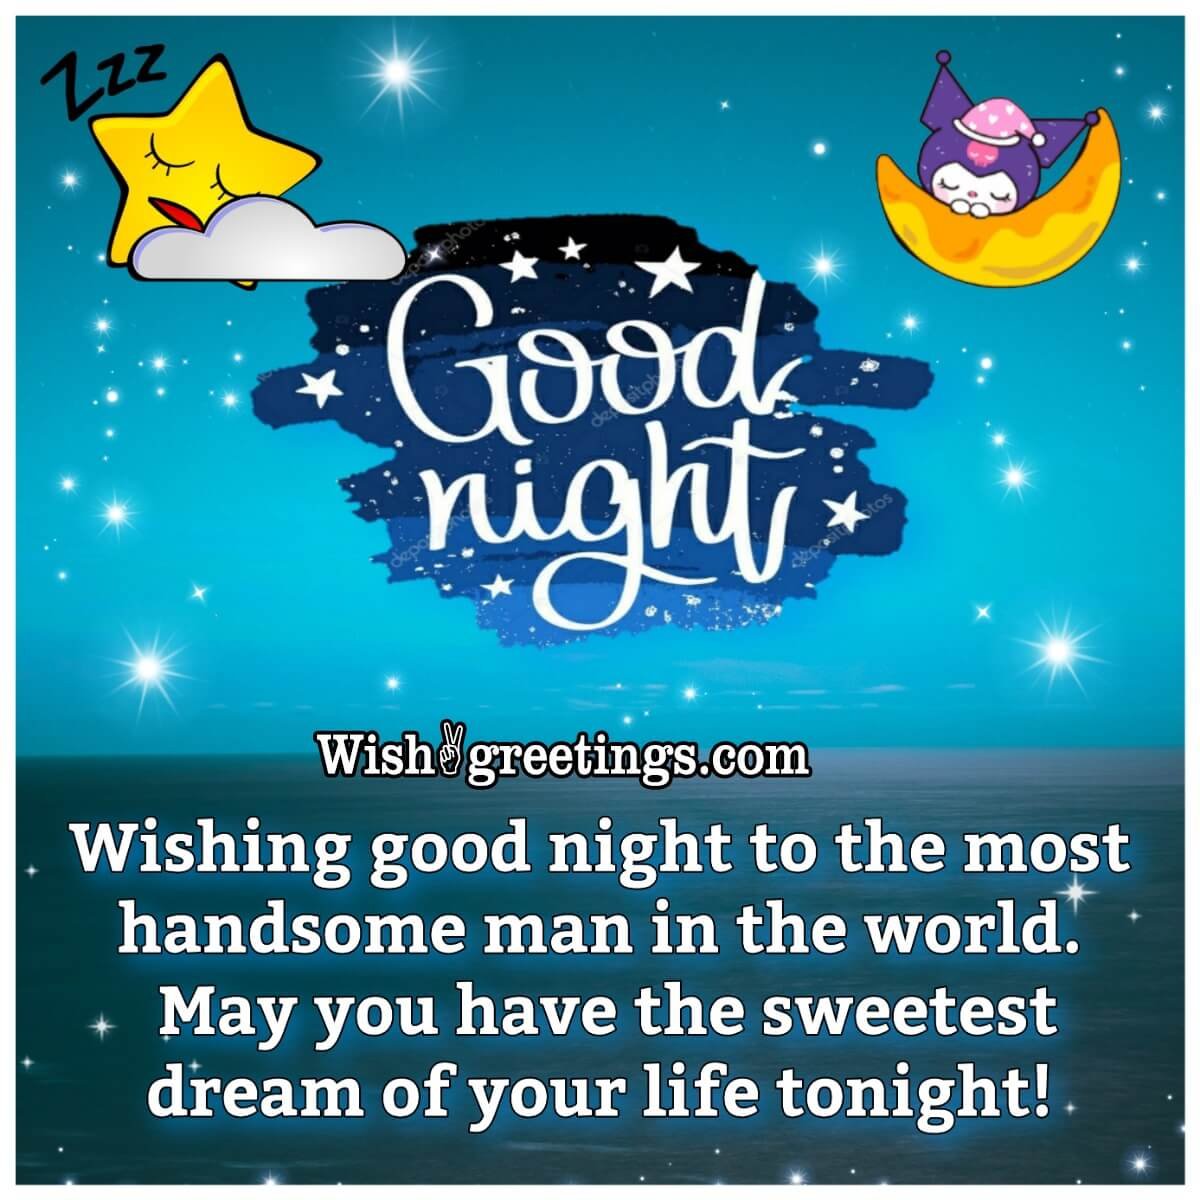 Good Night Messages for Boyfriend - Wish Greetings